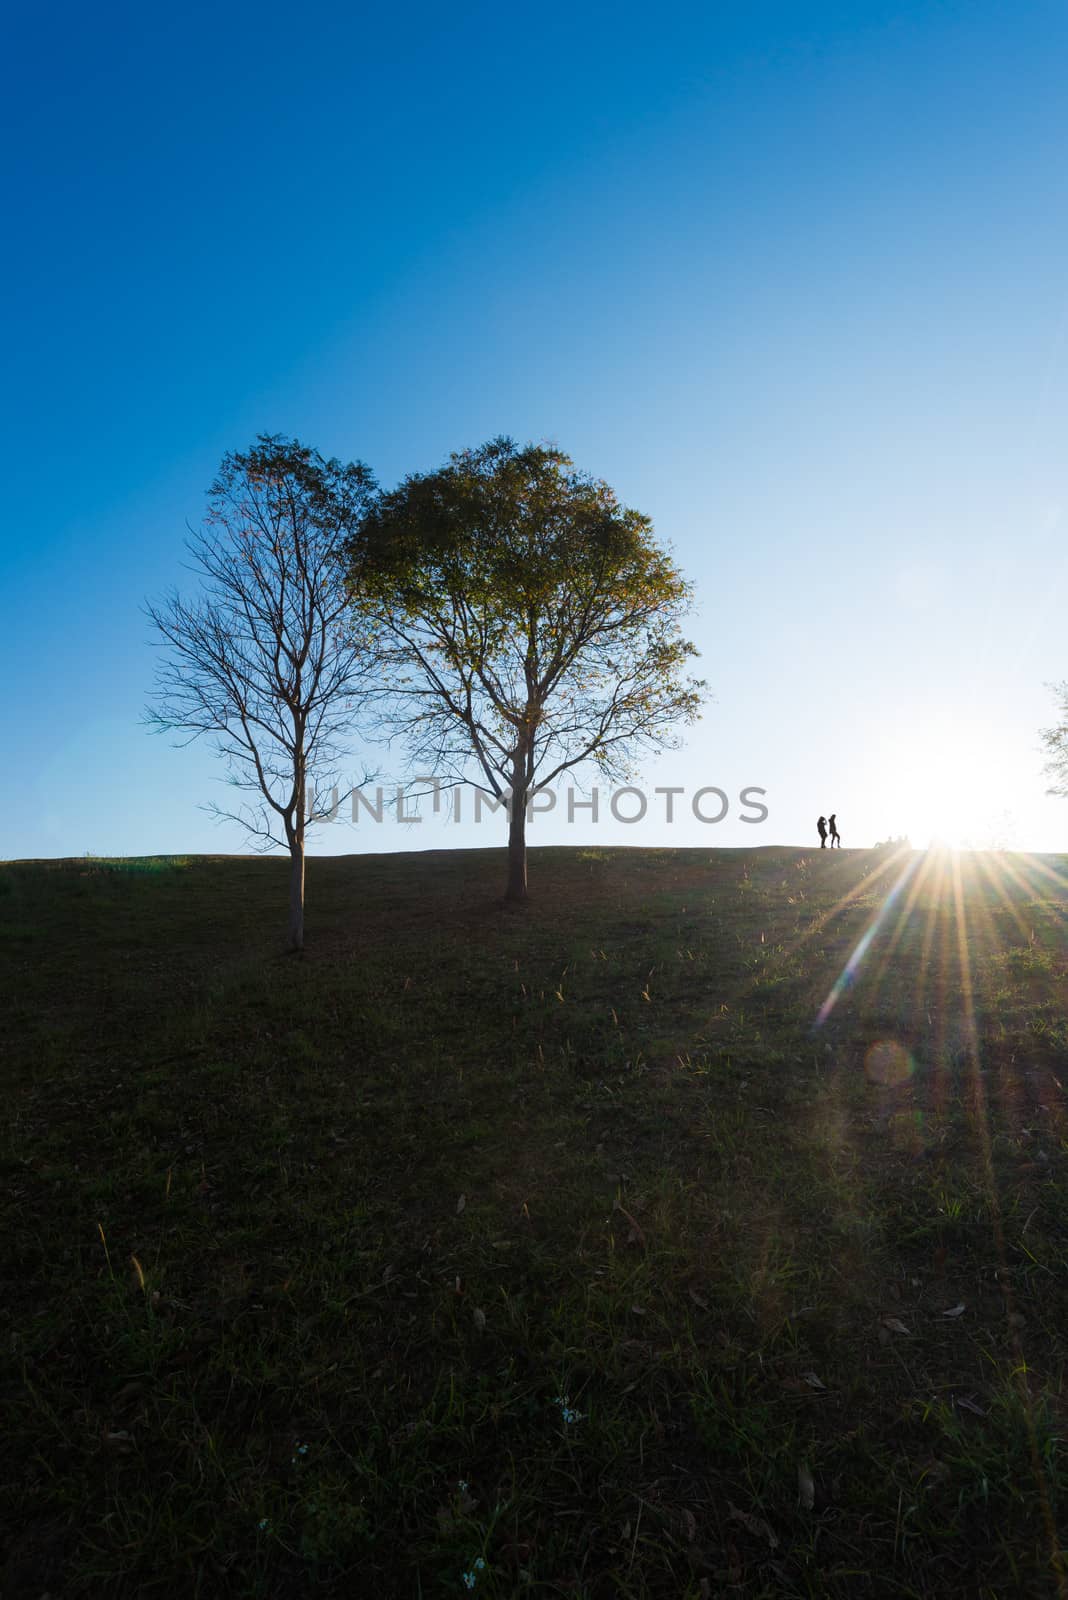 silhouette of people on hill by moggara12